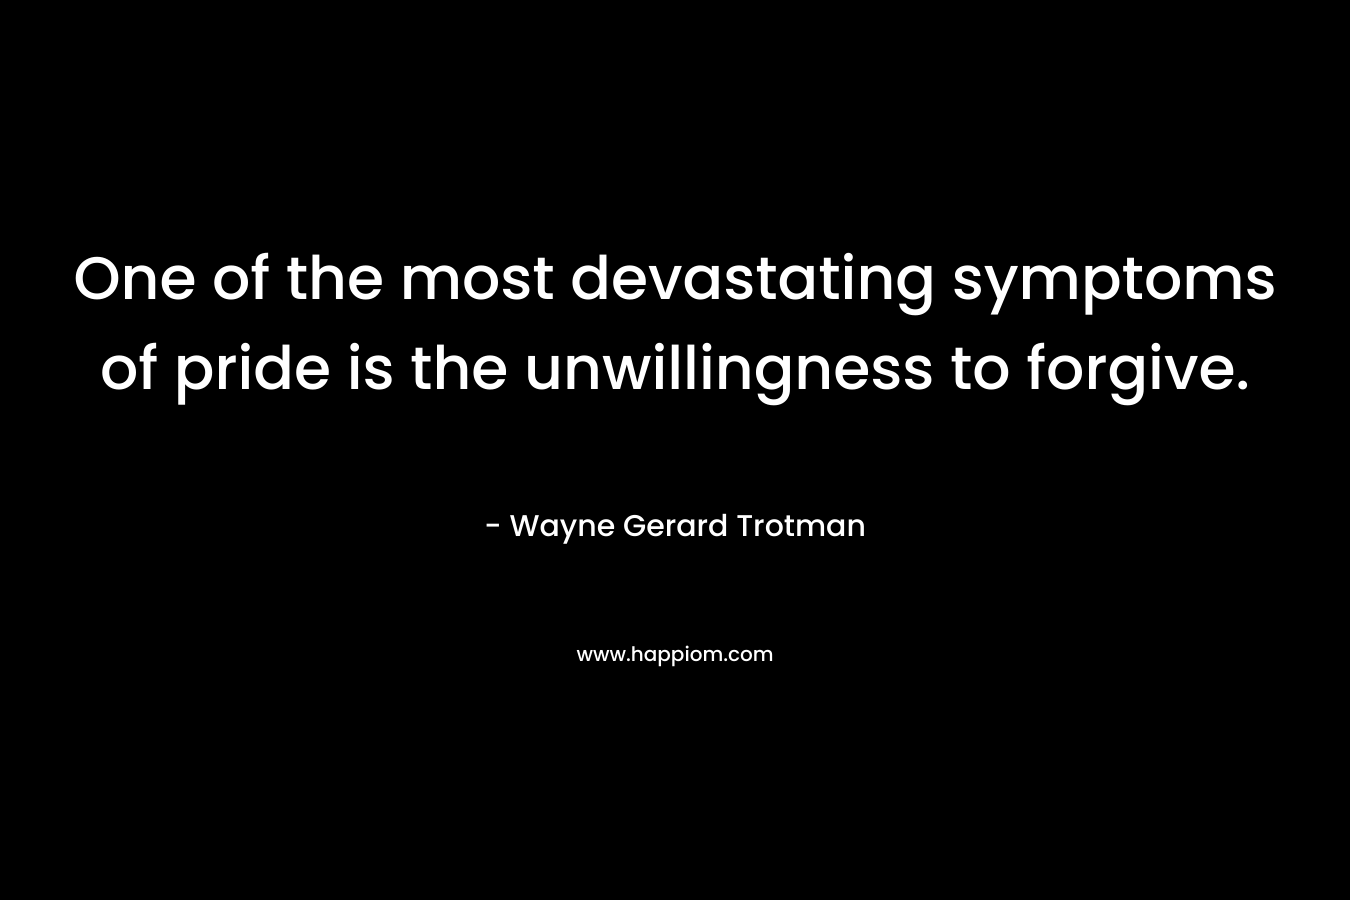 One of the most devastating symptoms of pride is the unwillingness to forgive. – Wayne Gerard Trotman